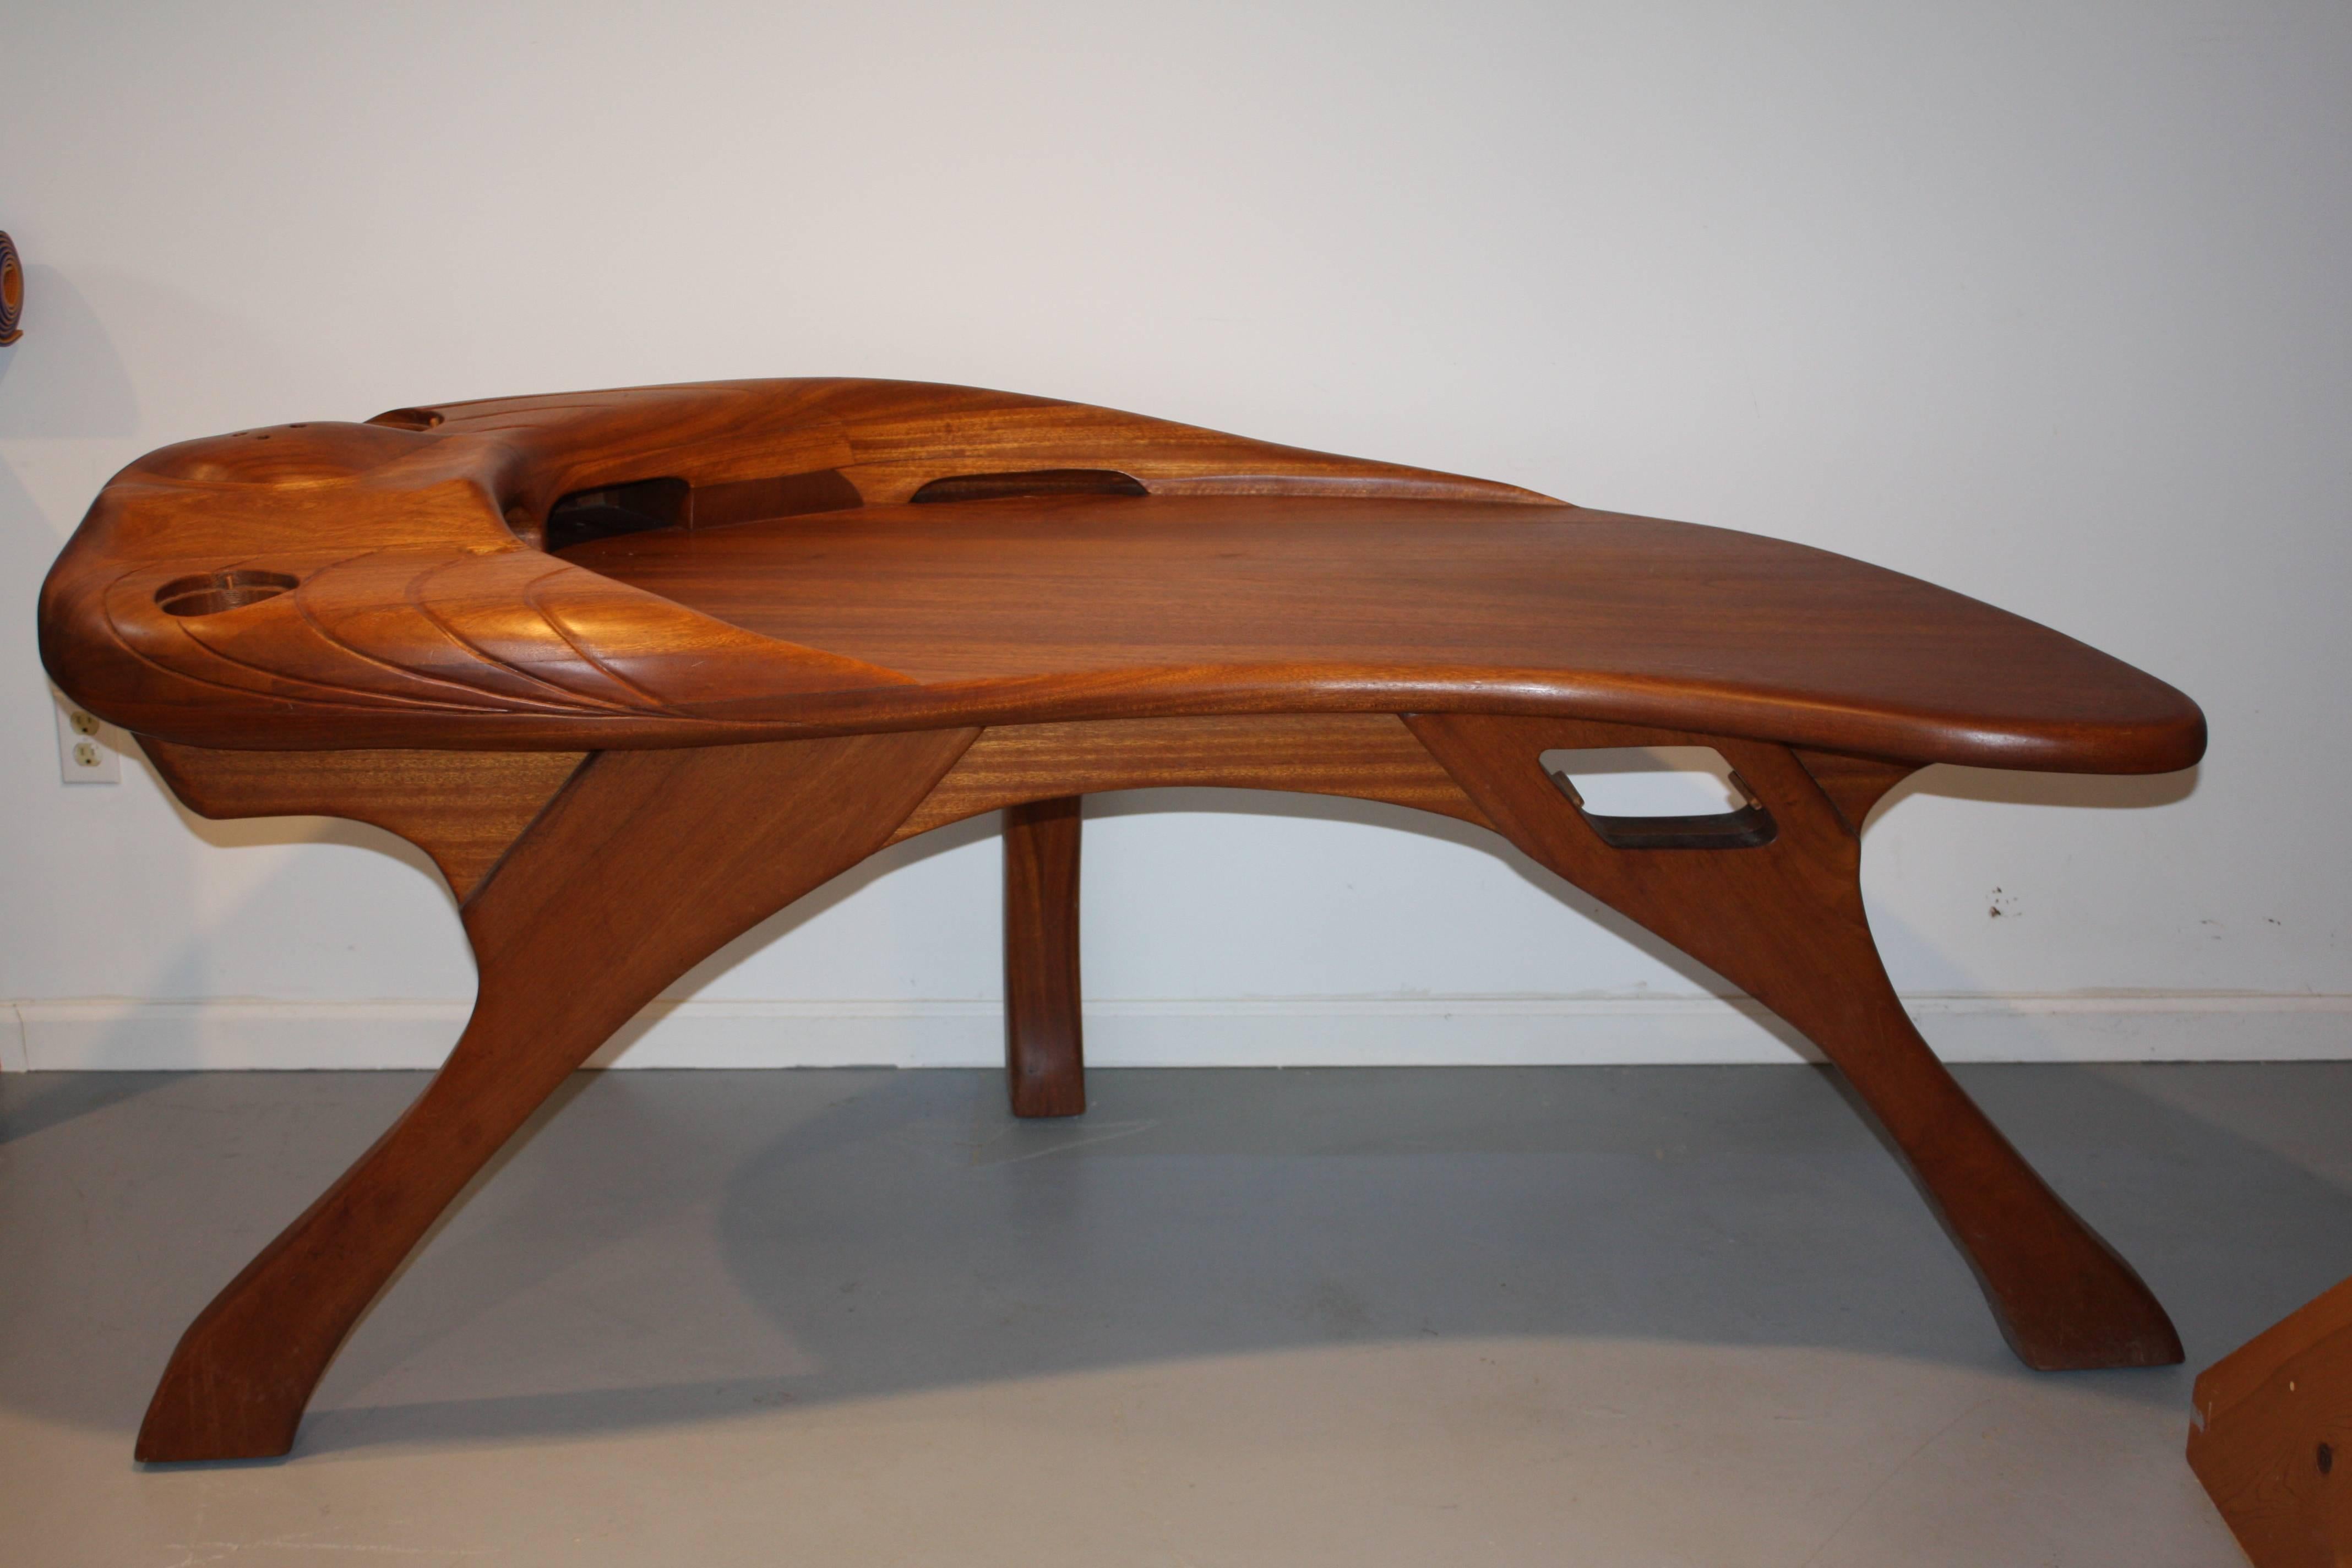 Beautiful example of early 1970s woodwork design. Sensuously sculpted and hand finished Cherry and Mahogany desk in an earthy modern style that evokes the Utopian sensibility of the period. With artist cipher and date (1973) to underside.